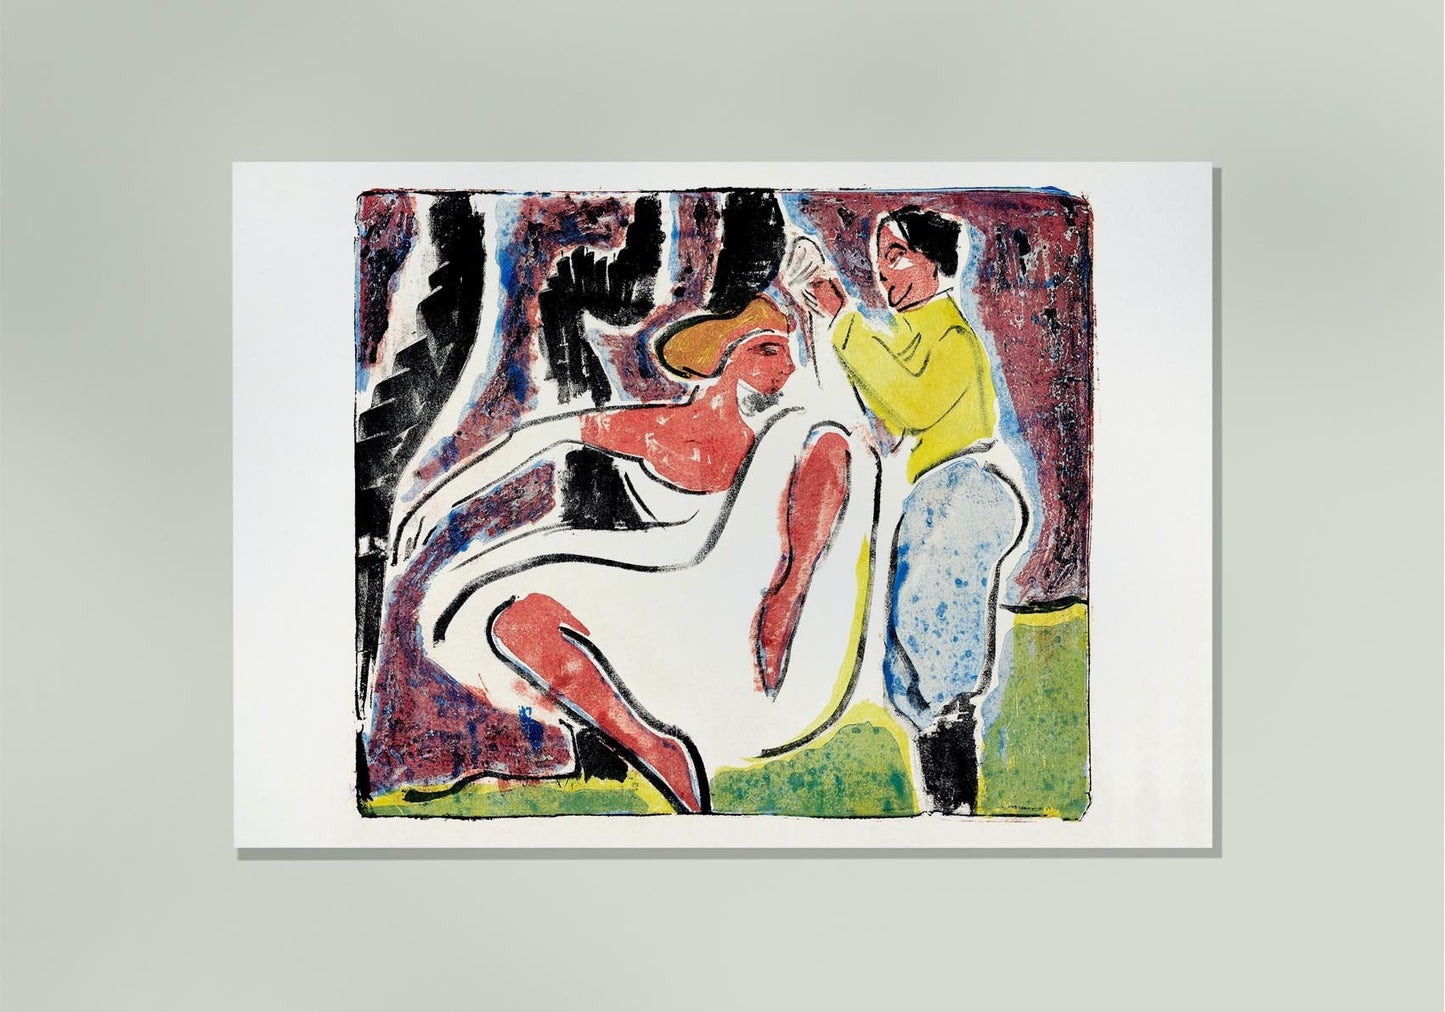 Russian Dancers by Ernst Kirchner